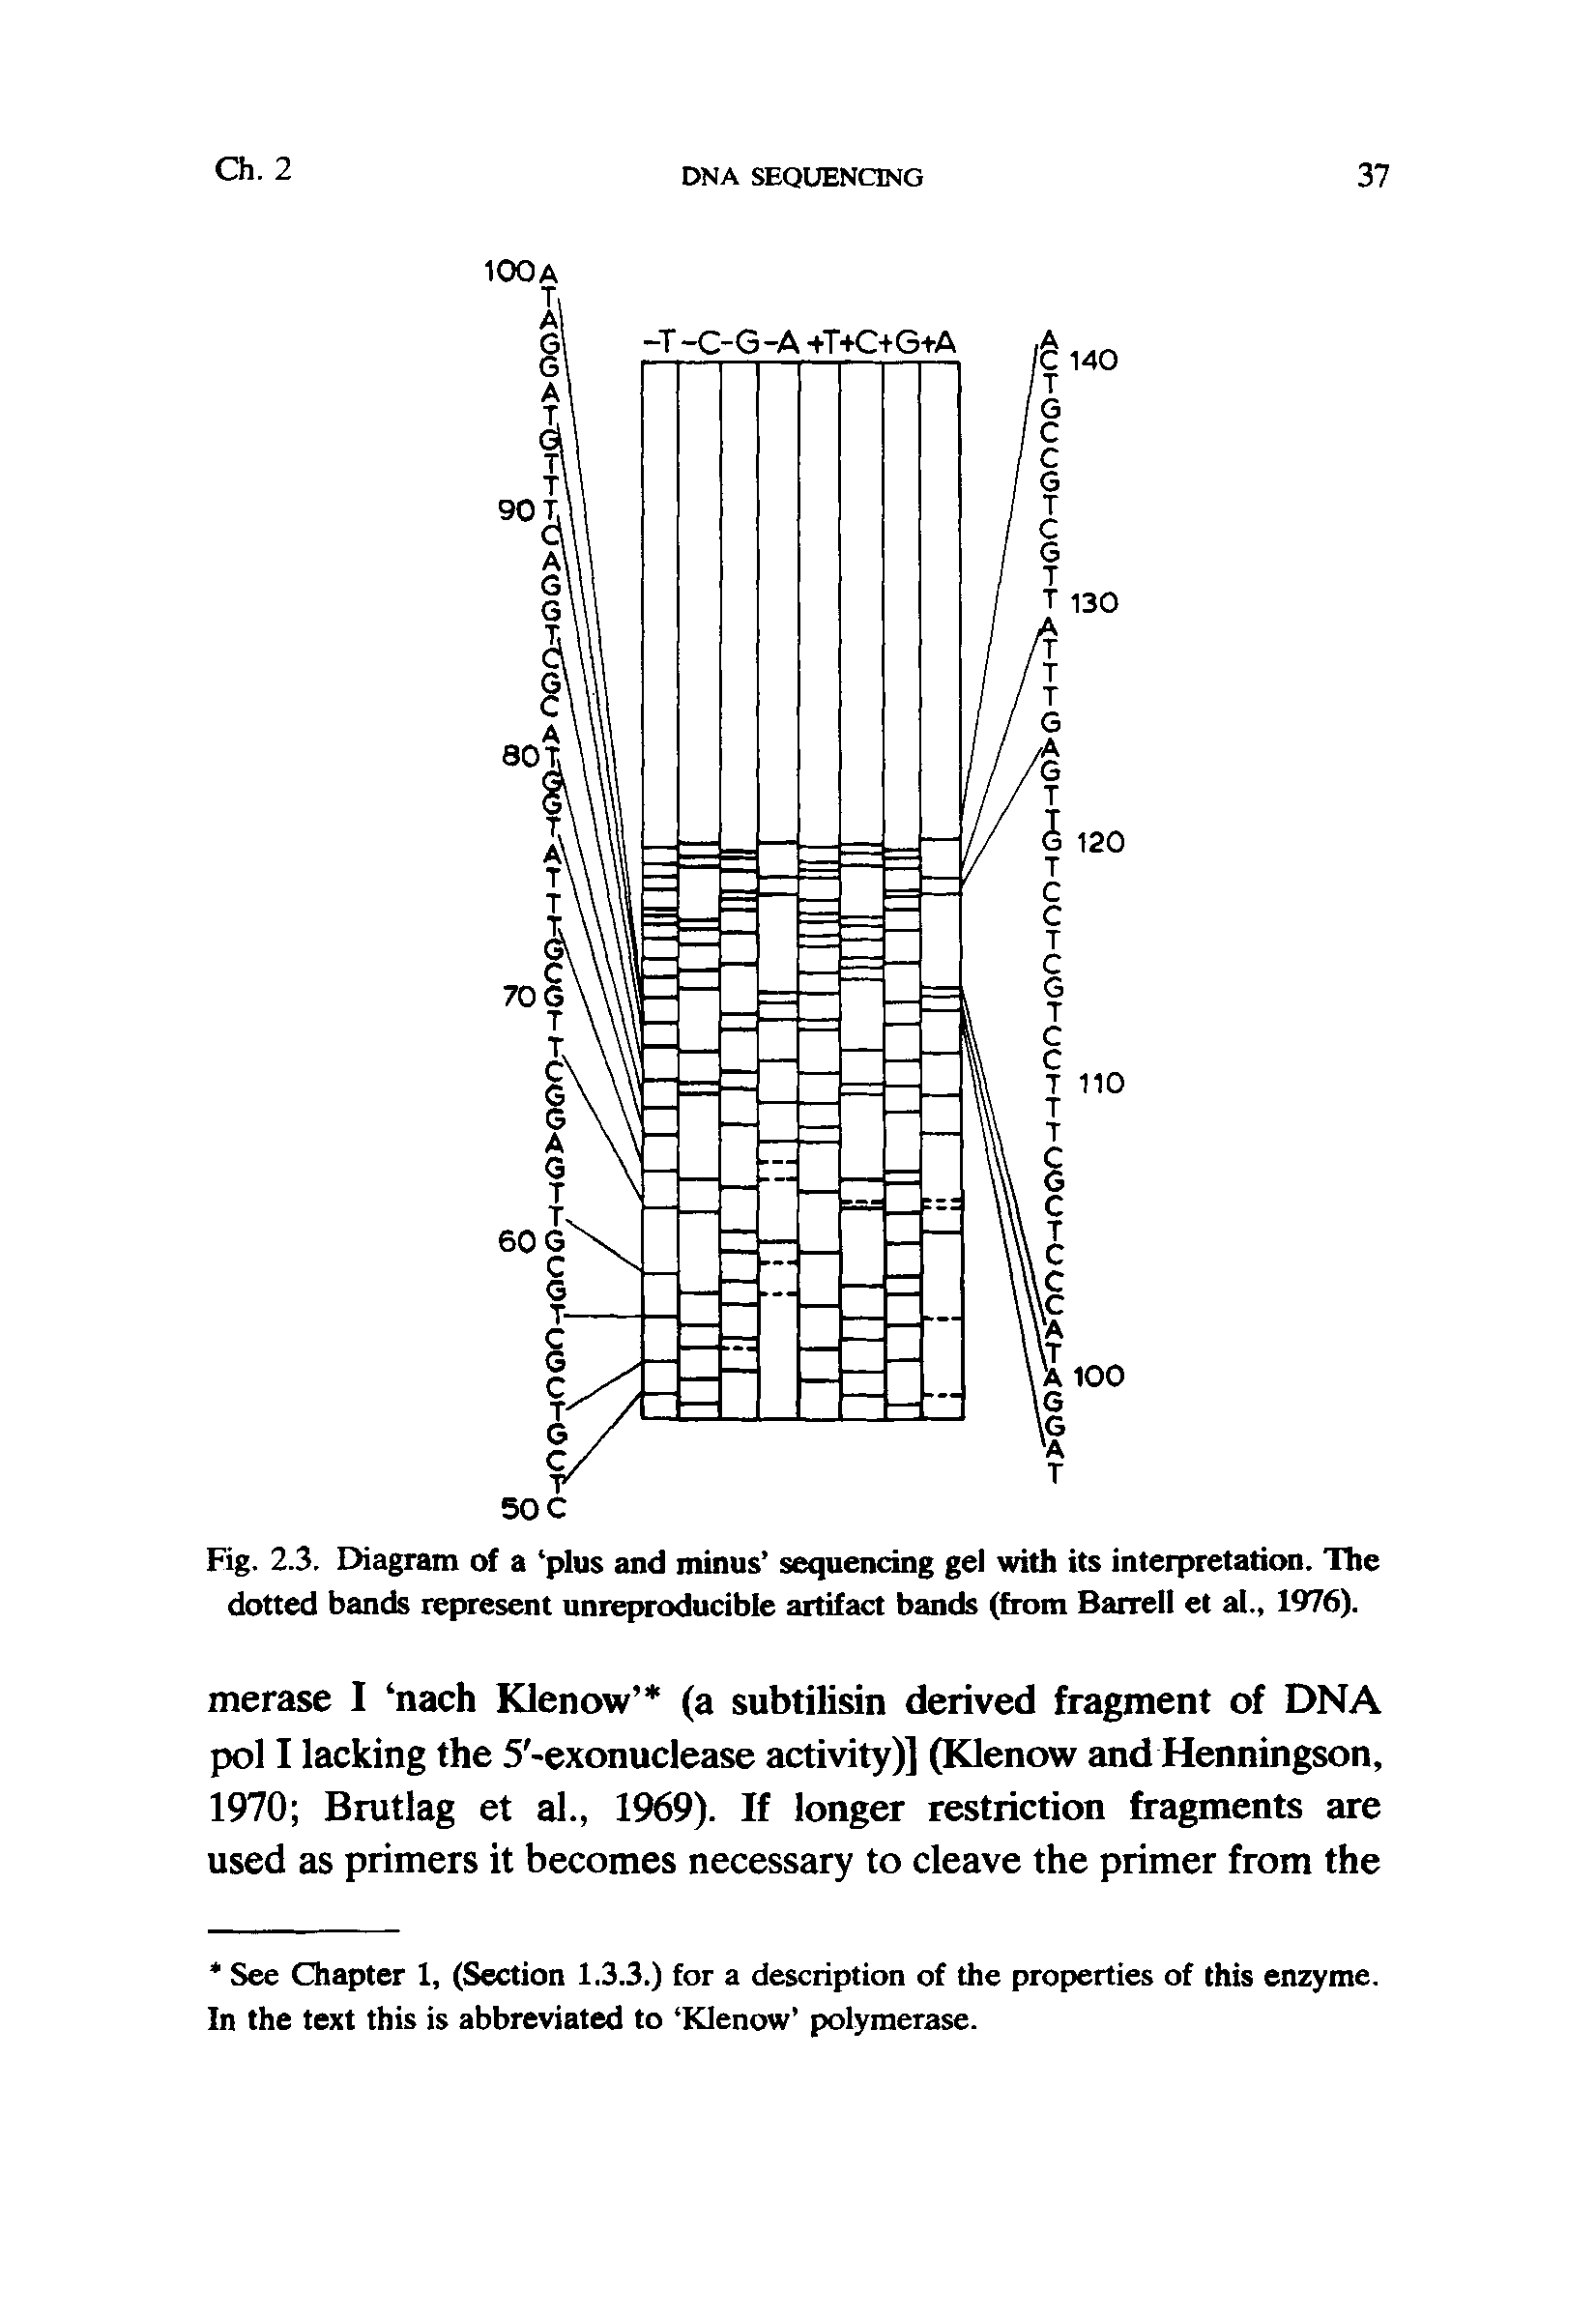 Fig. 2.3. Diagram of a plus and minus sequencing gel with its interpretation. The dotted bands represent umeproducible artifact bands (from Barrell et al., 1976).